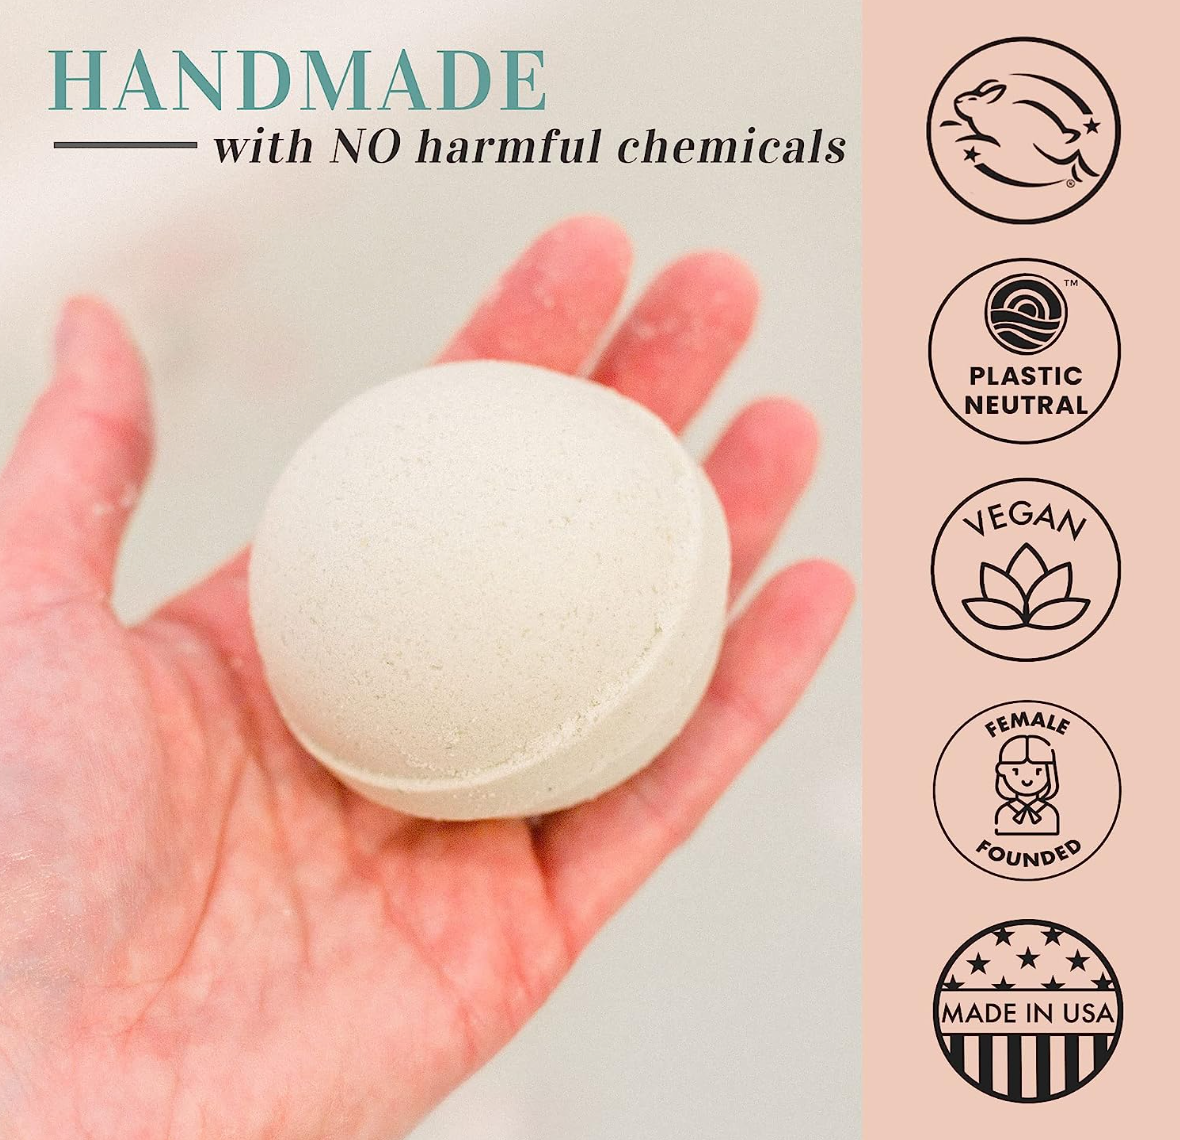 Bath Bombs for Women Relaxing, USA Made - Bubble Bath Bomb Set Organic Bath Bombs for Kids - Vegan & All Natural Bath Bombs for Girls Gift Individually Wrapped Handmade Bathbombs